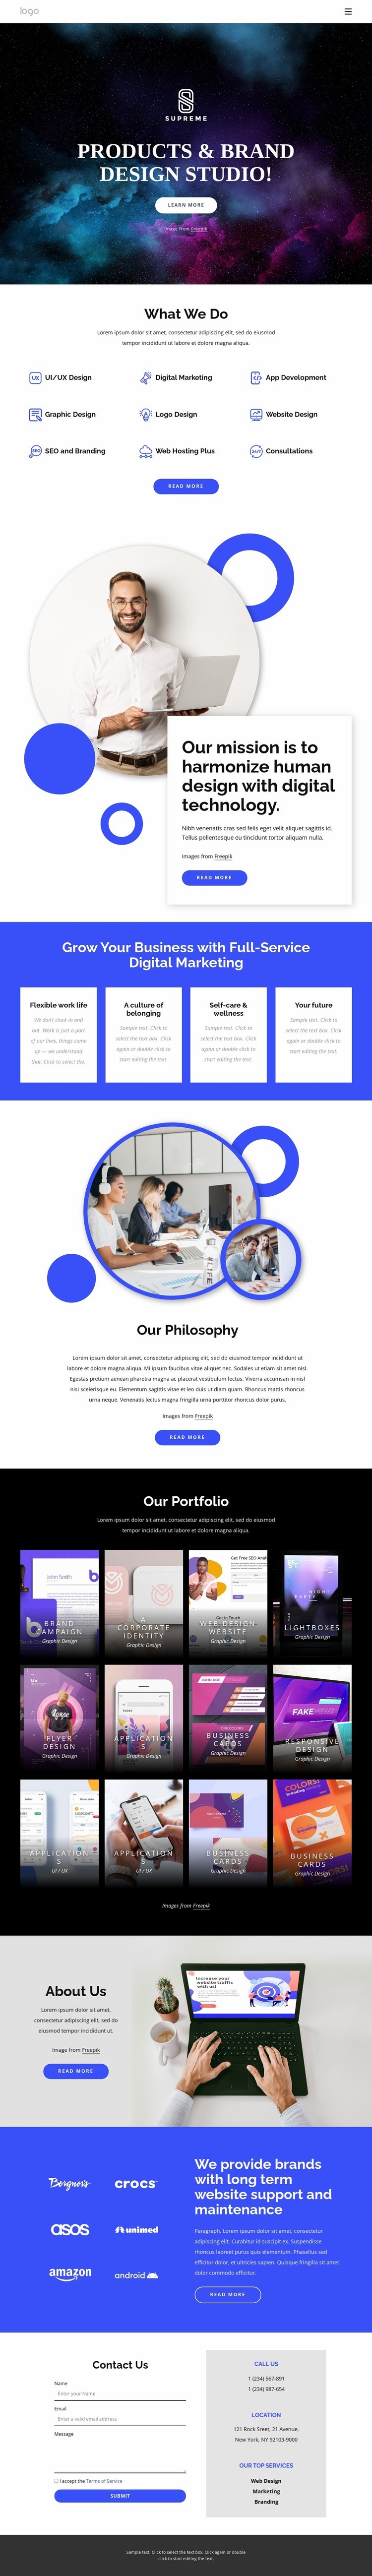 Products and brand design studio Homepage Design